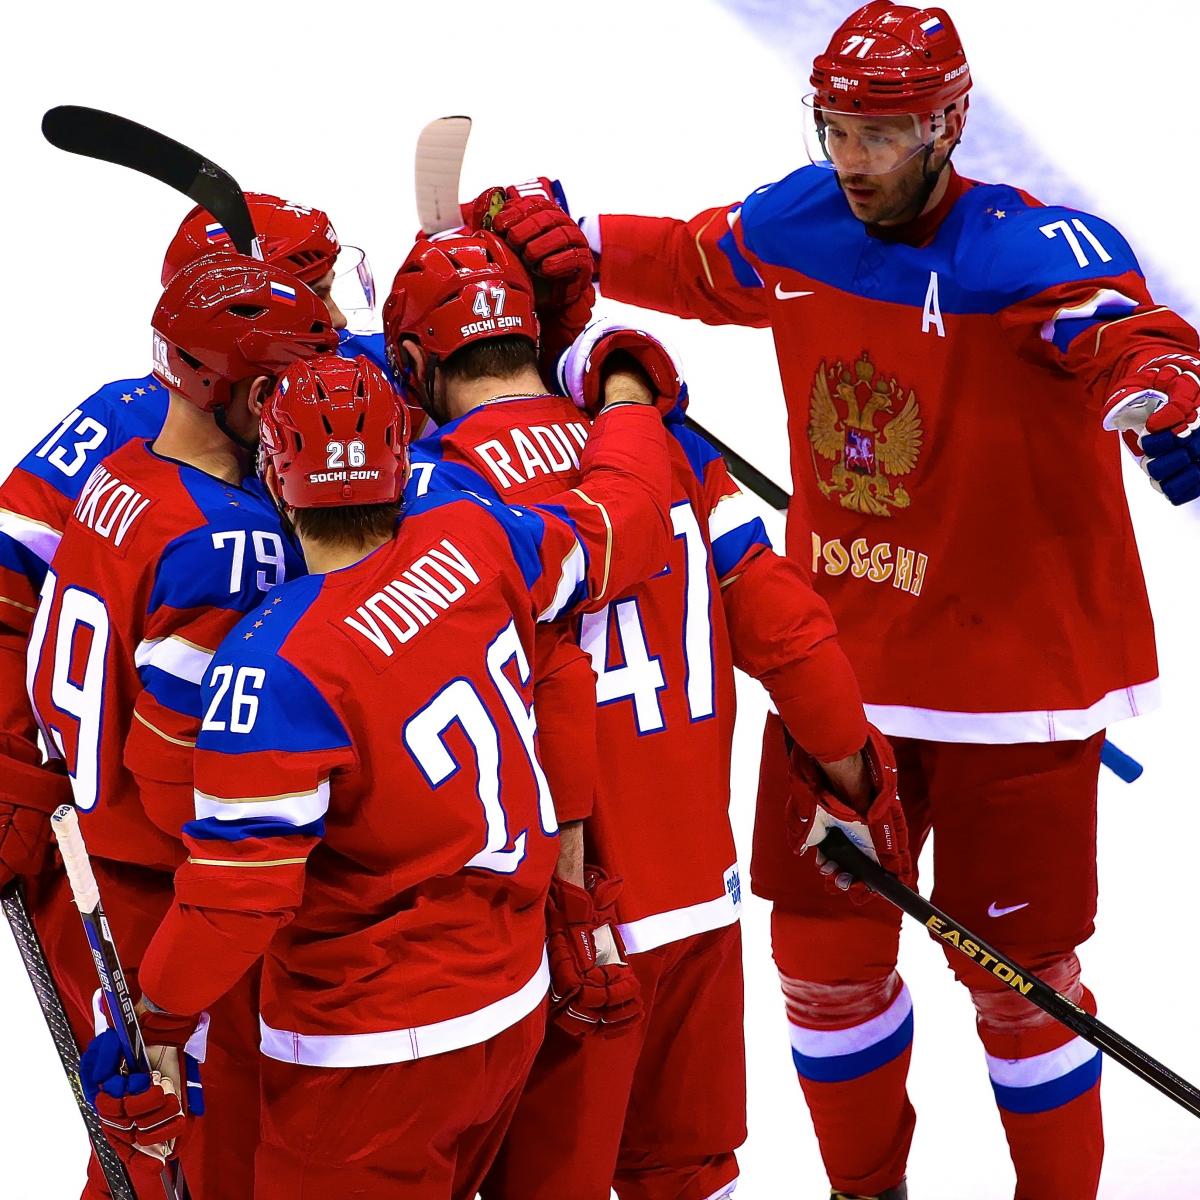 Alex Ovechkin teams up with Evgeni Malkin and Slava Fetisov in